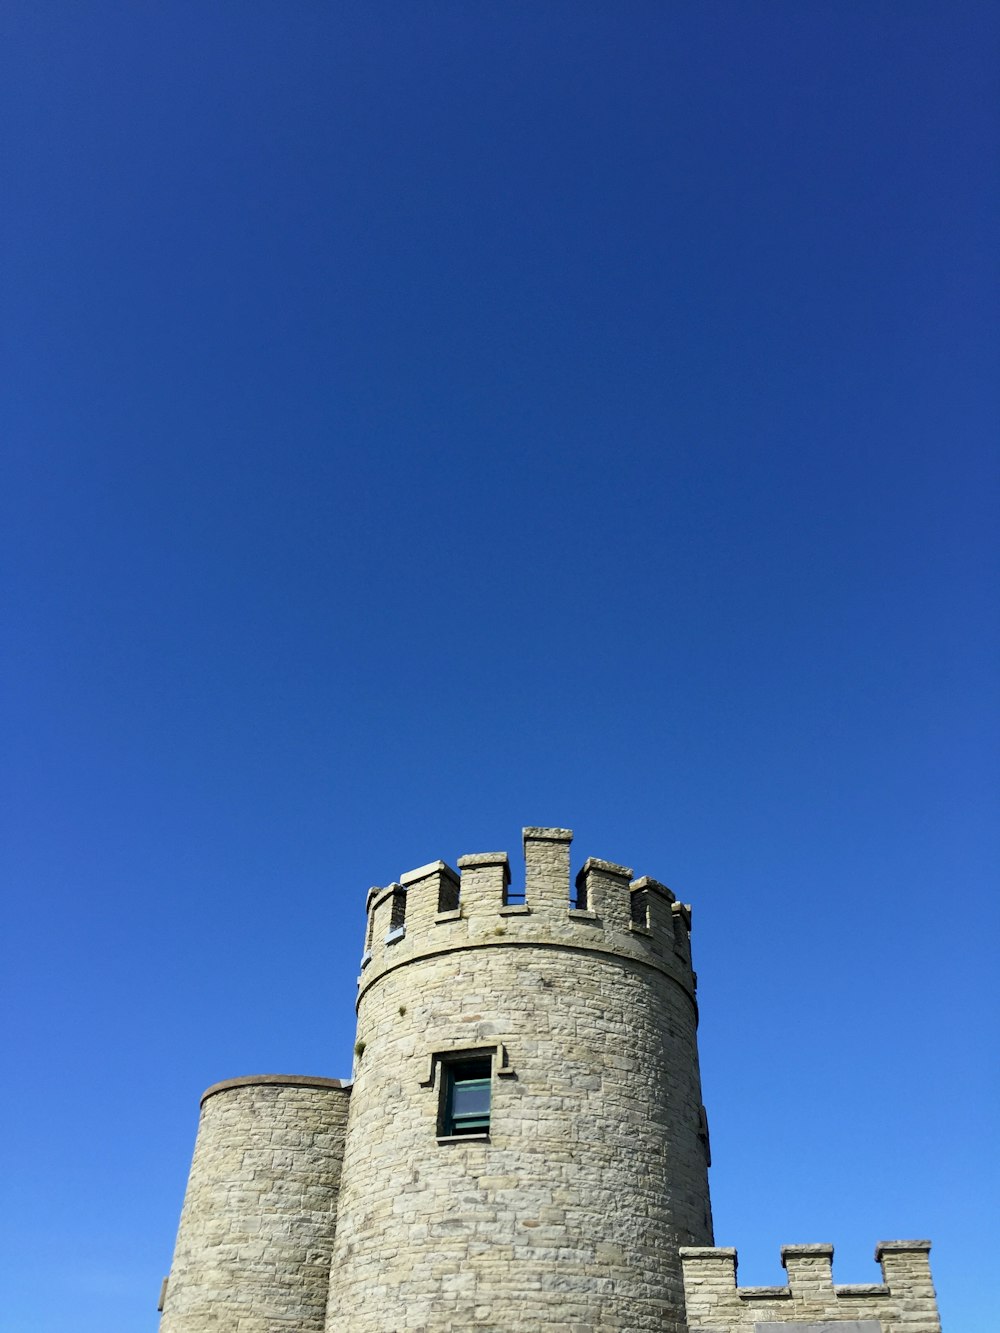 gray concrete tower under blue sky during daytime \